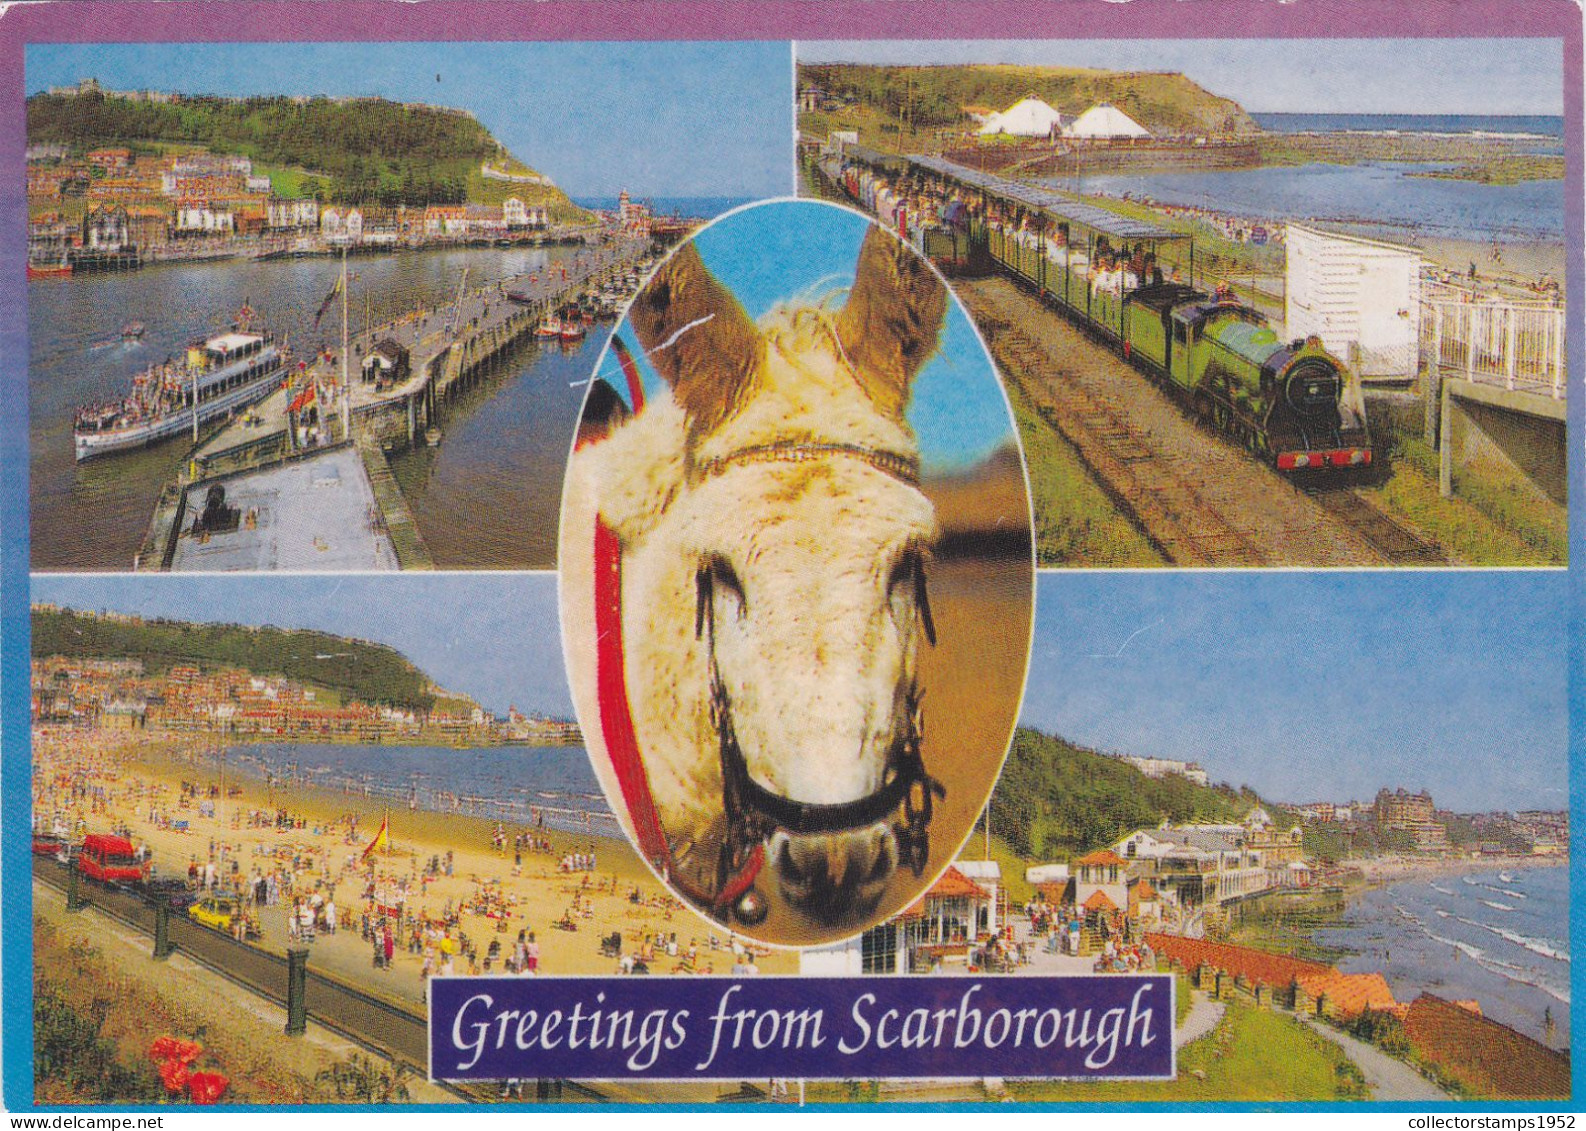 SCARBOROUGH, HARBOUR, LIGHTHOUSE, CASTLE, SOUTH BAY, NORTH BAY, UNITED KINGDOM - Scarborough